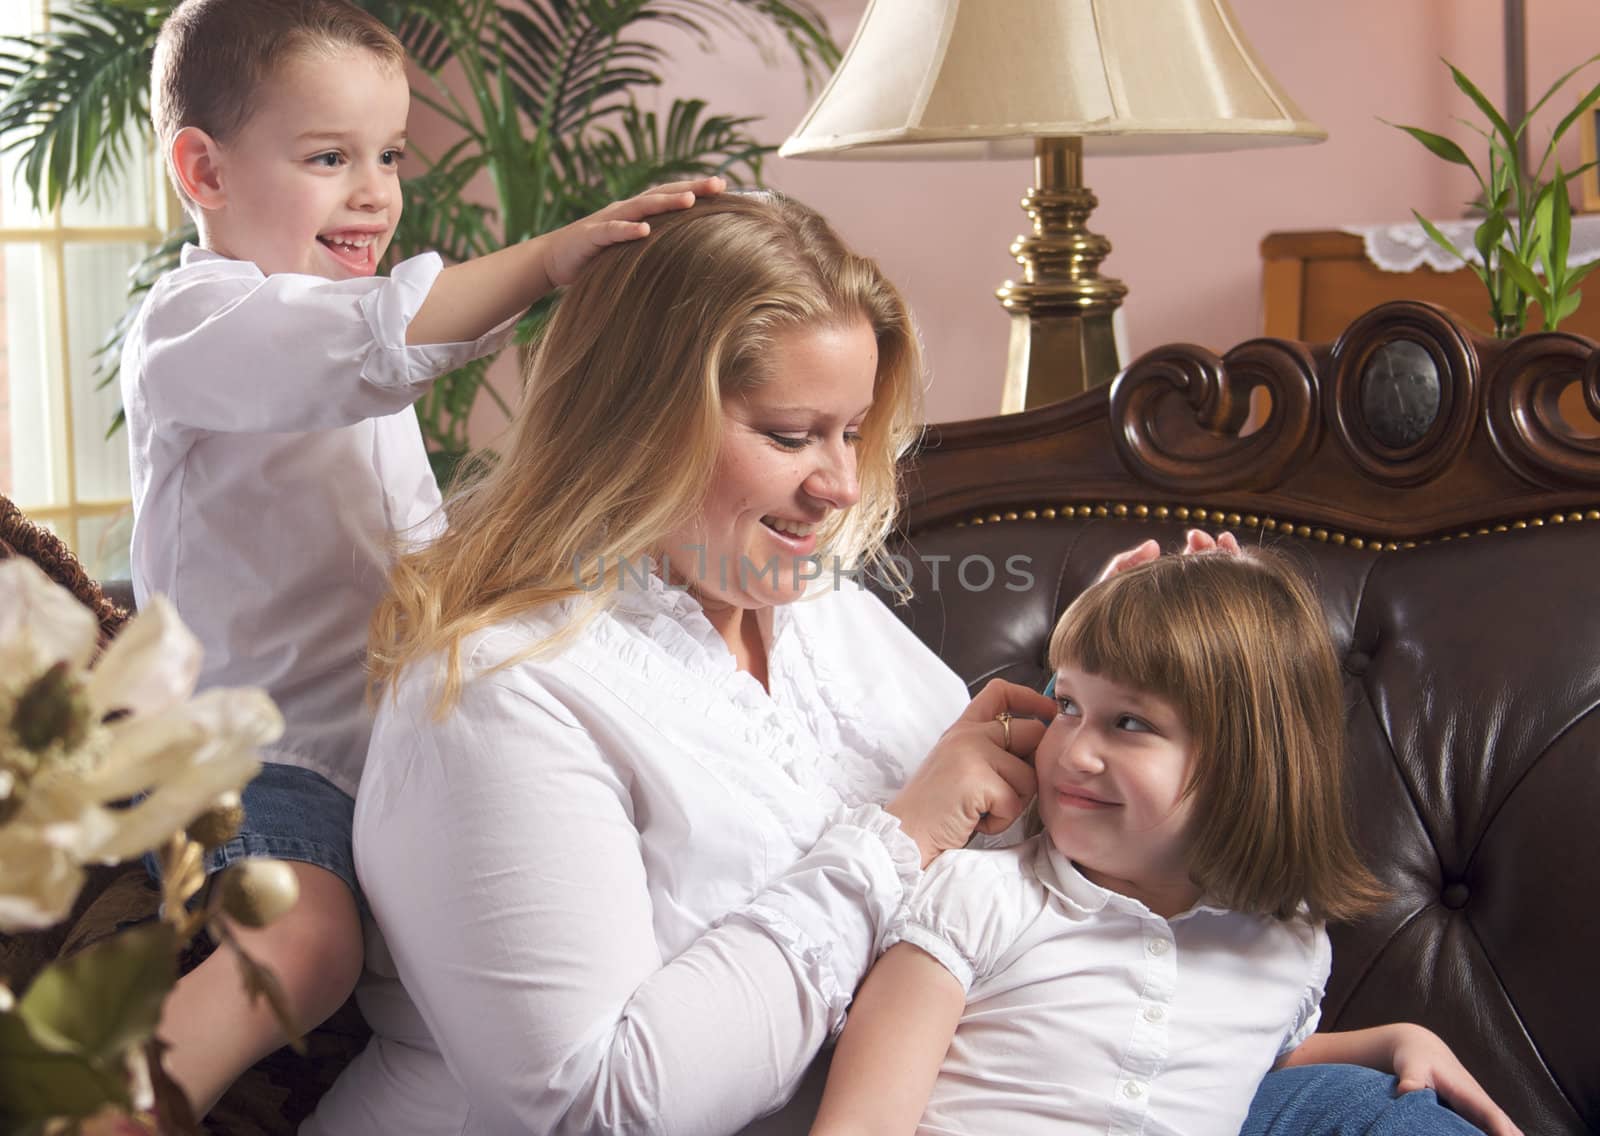 Mother and Children Enjoying a Fun Moment on the Couch